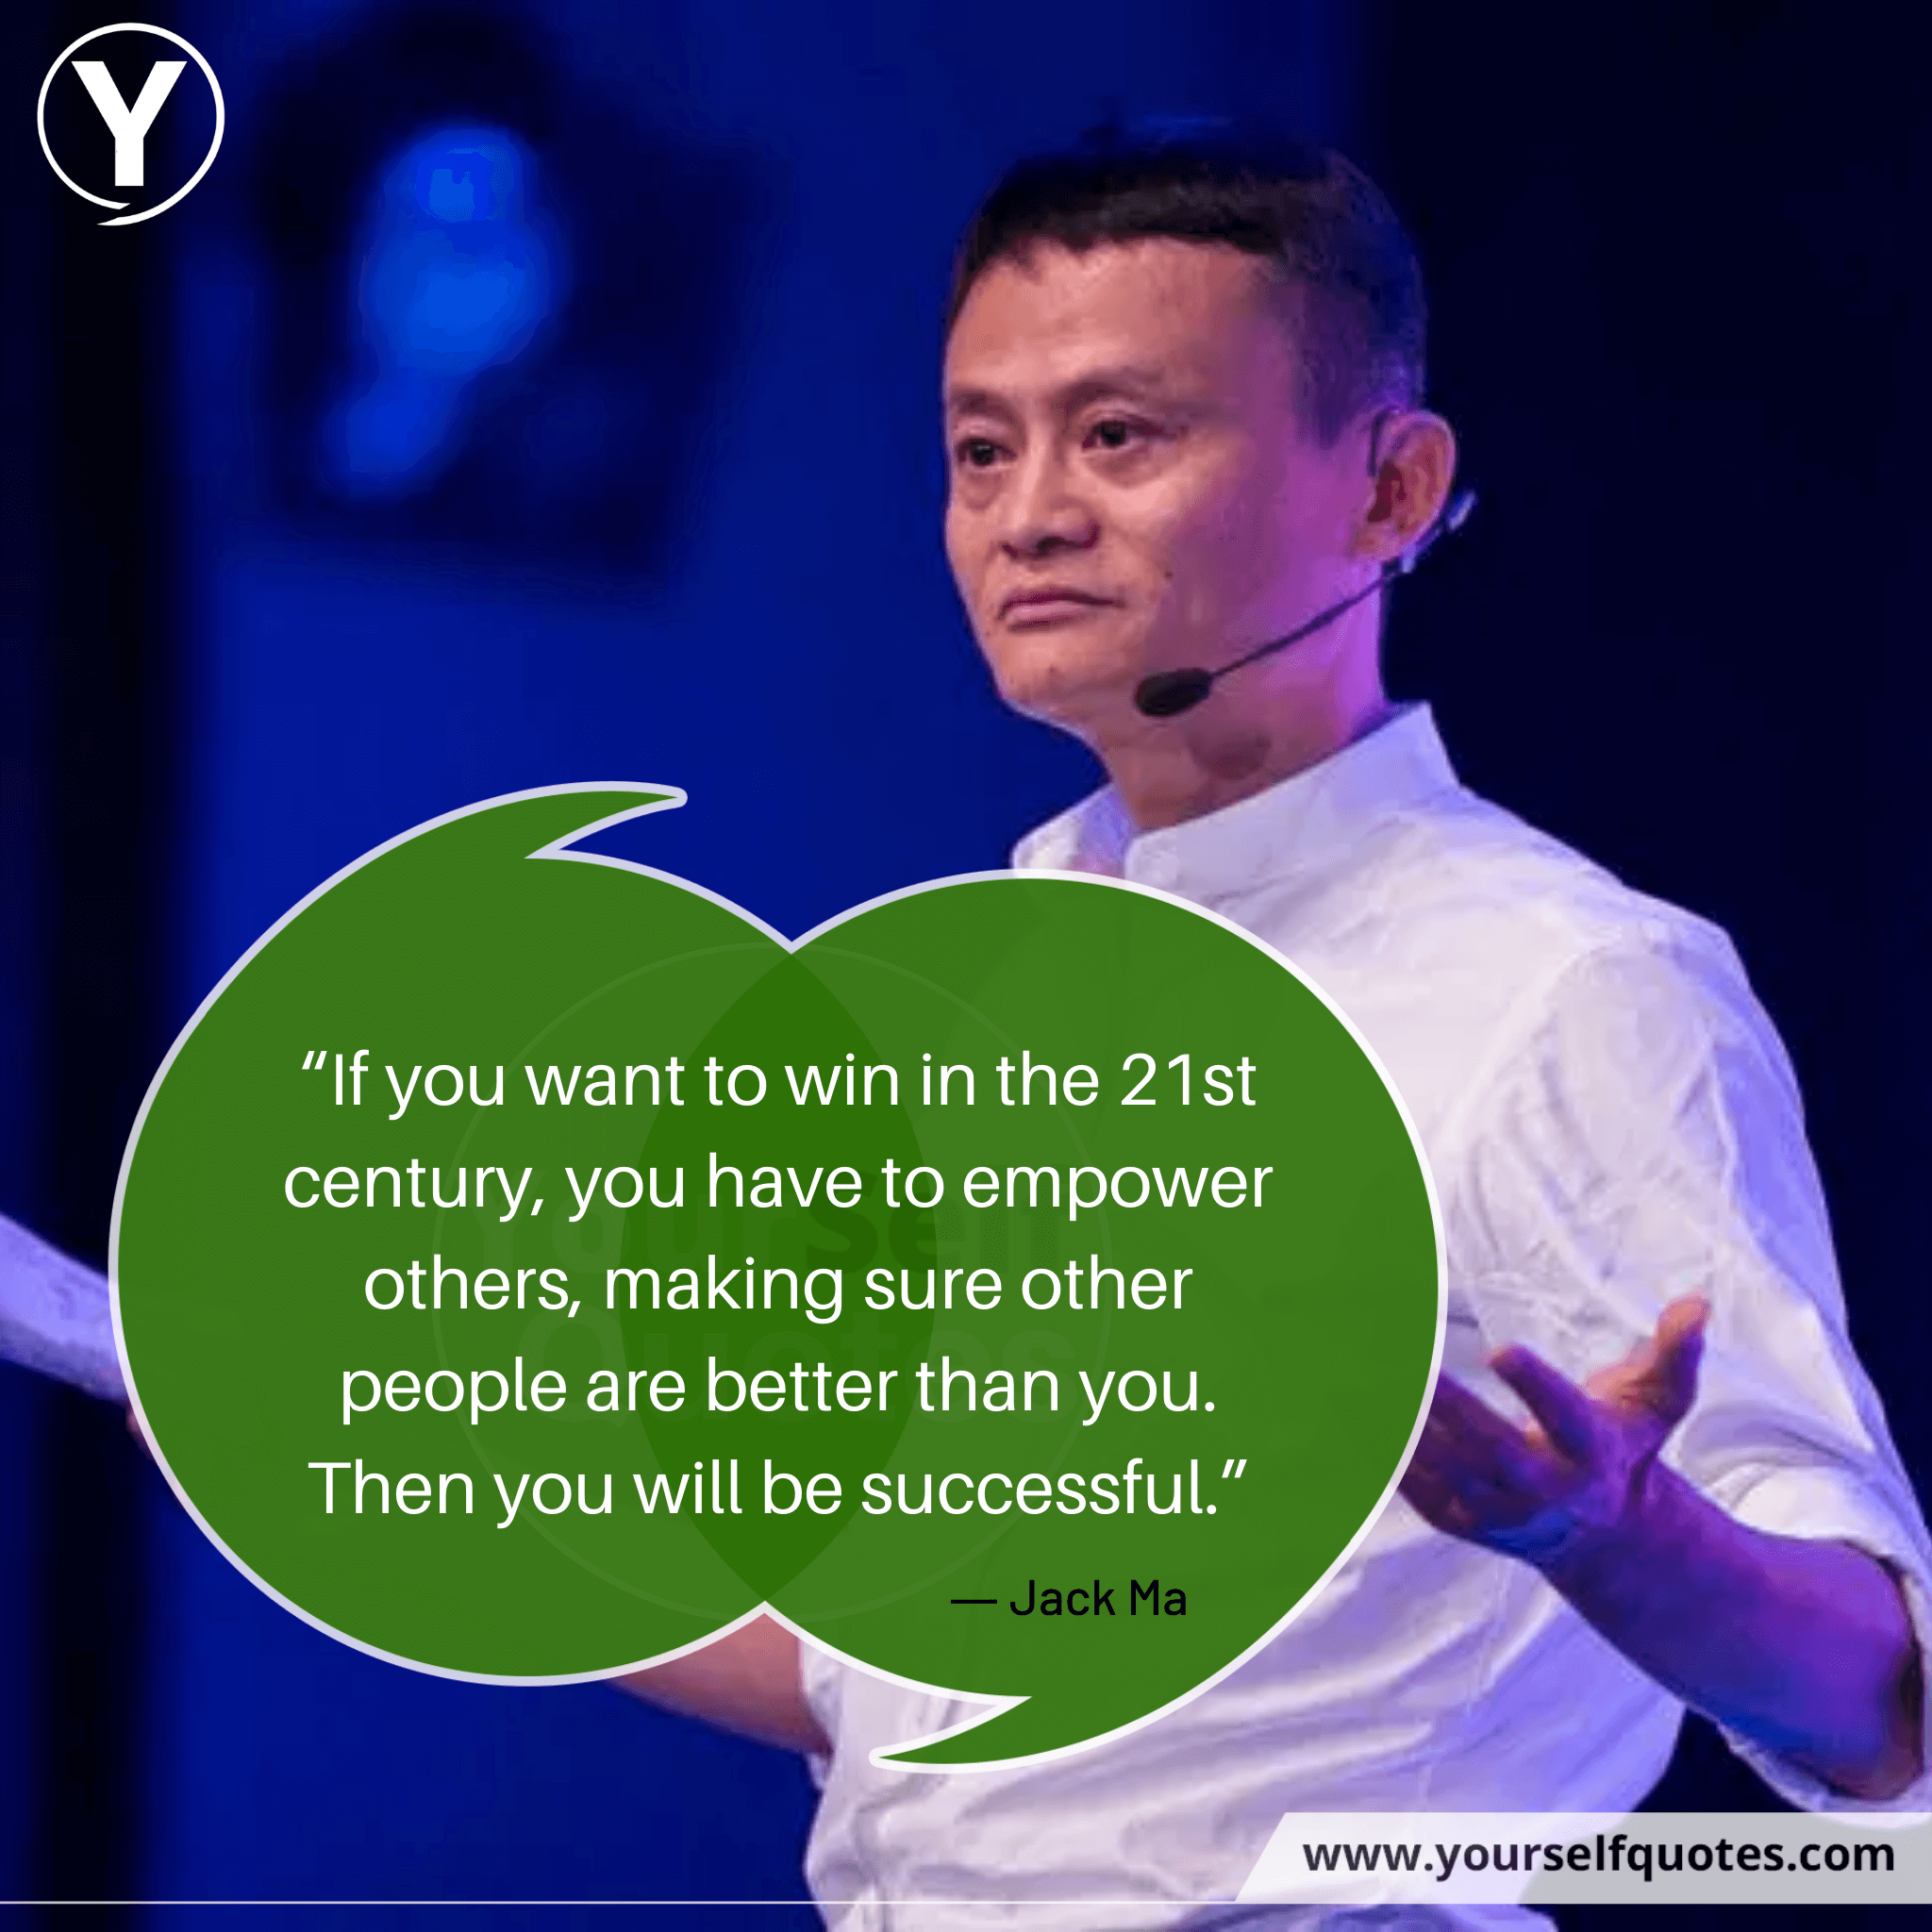 Jack Ma Successful Quotes